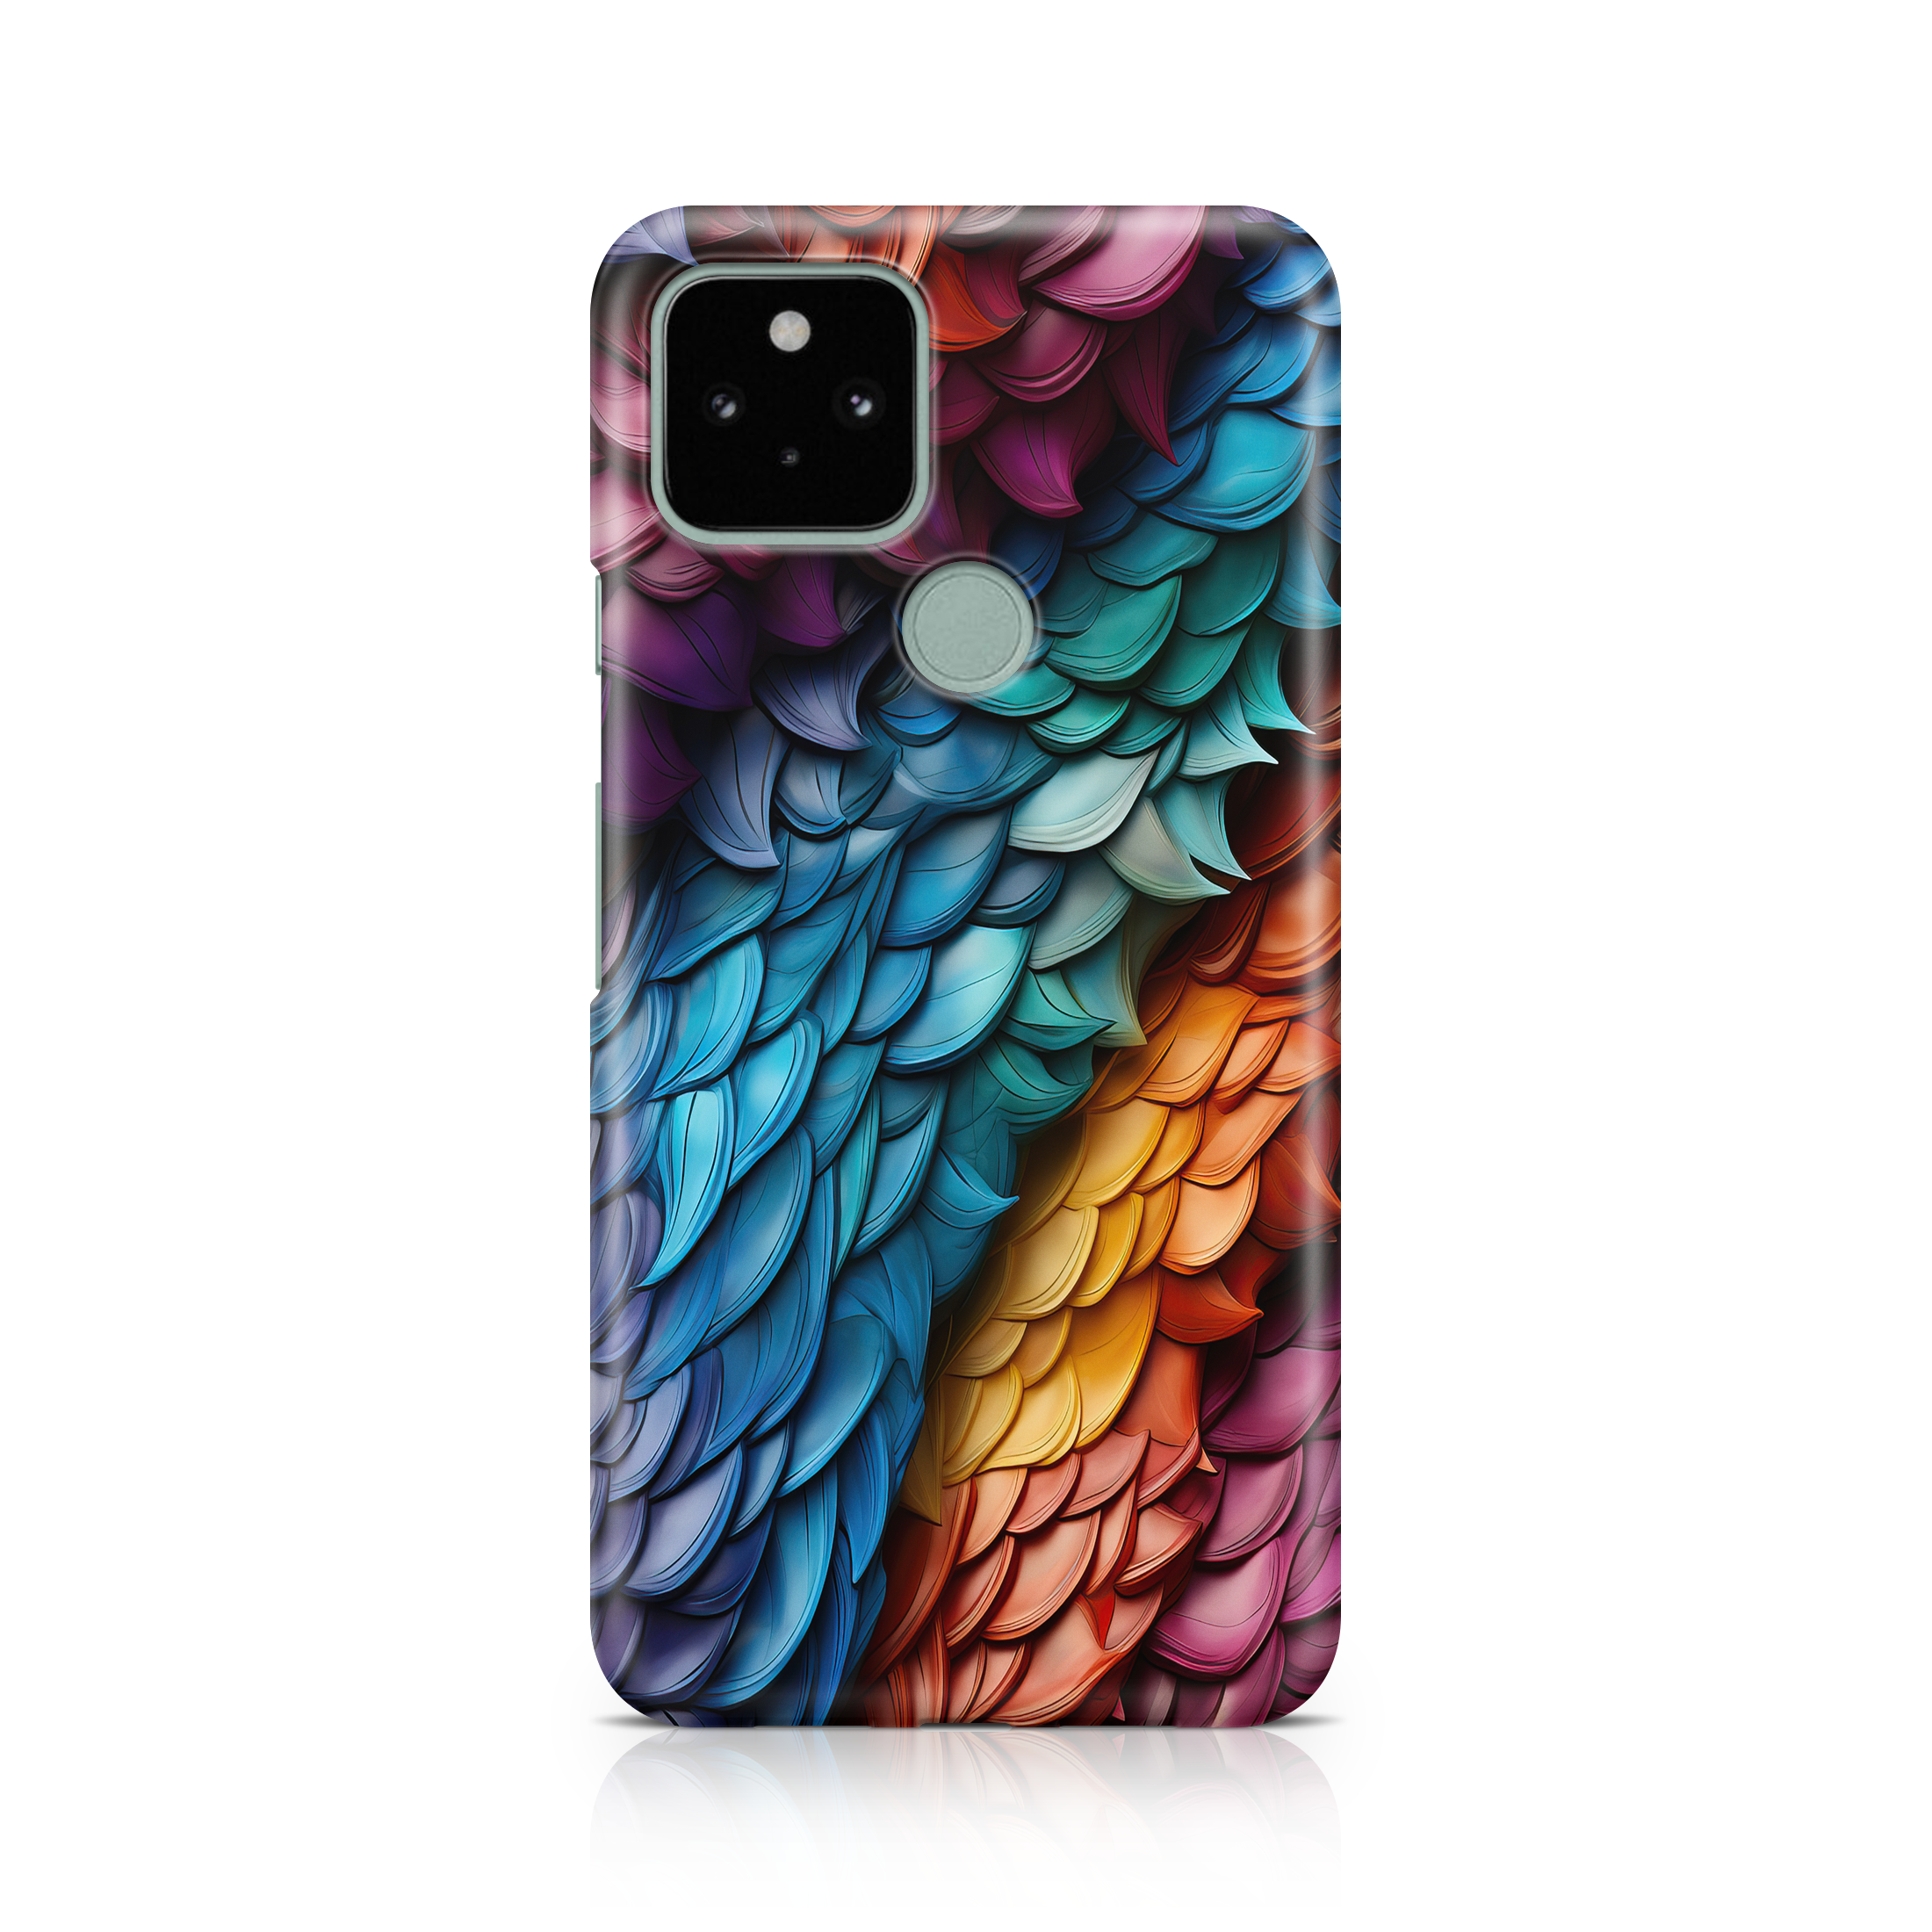 Rainbow Dragonscale - Google phone case designs by CaseSwagger